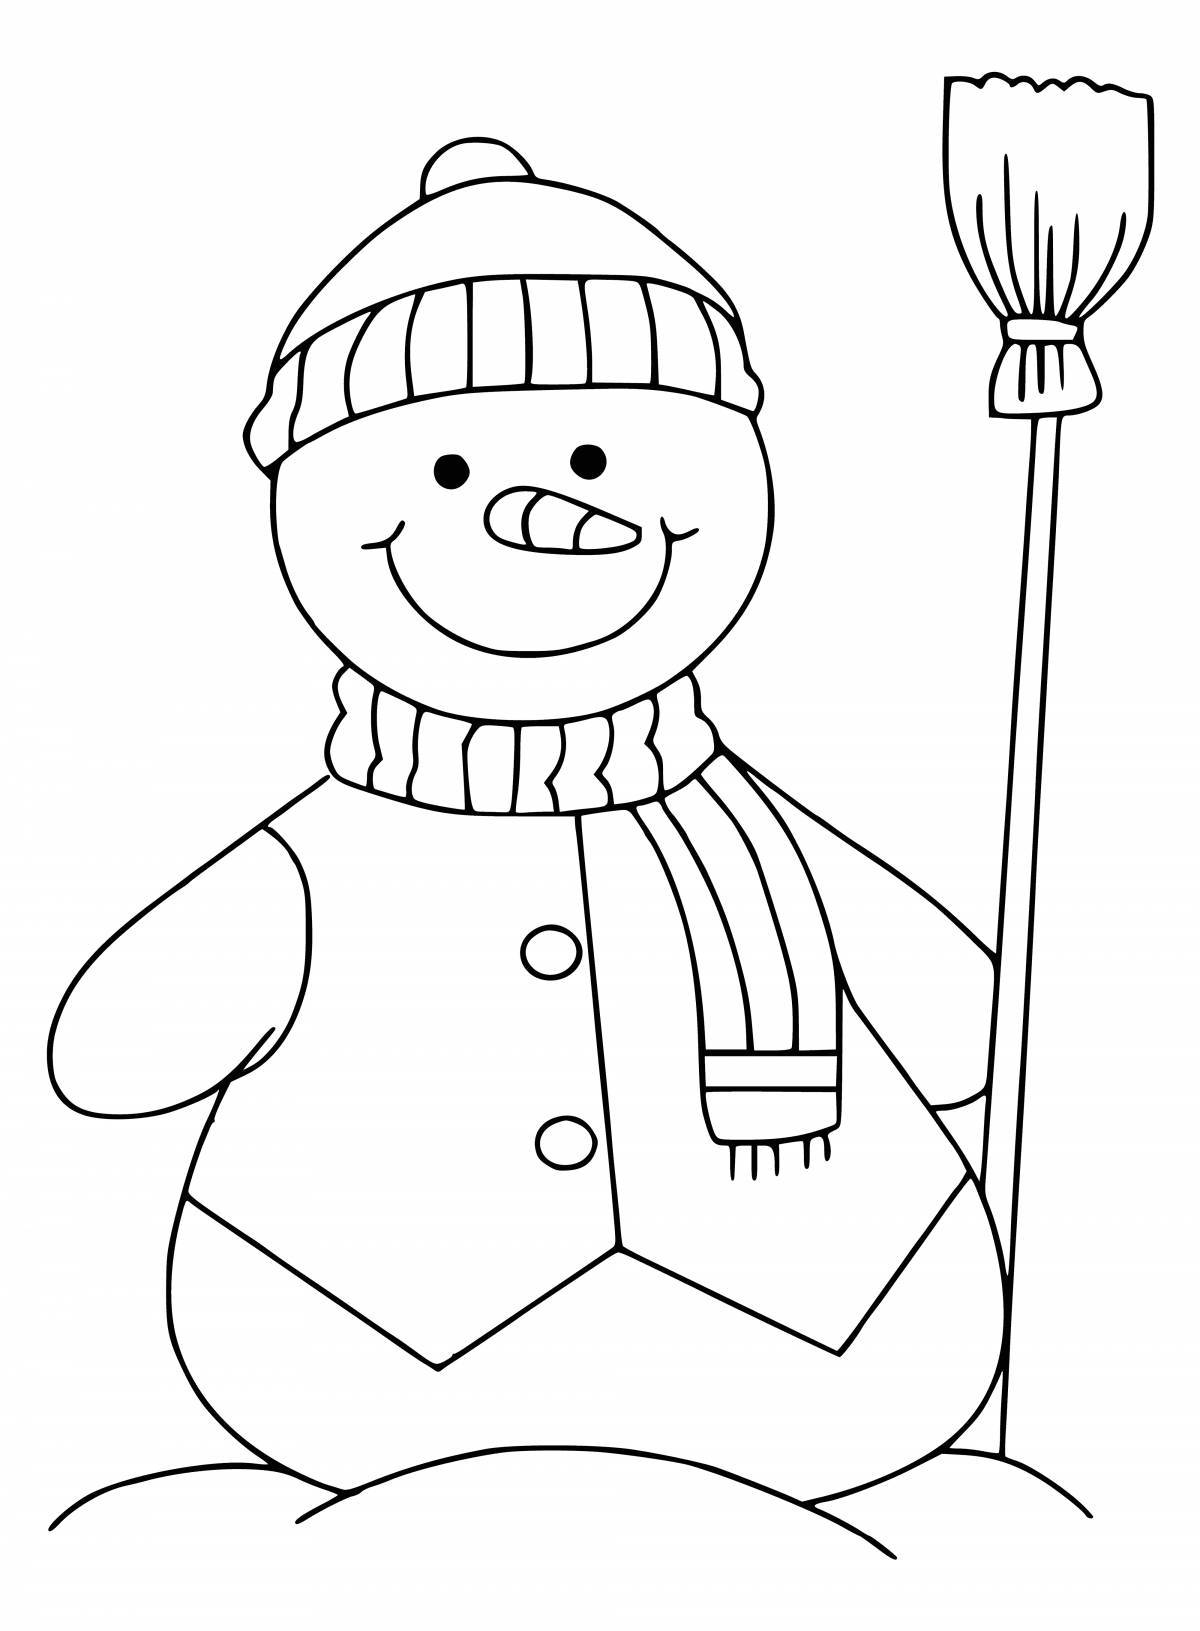 Colorful snowman coloring book for kids